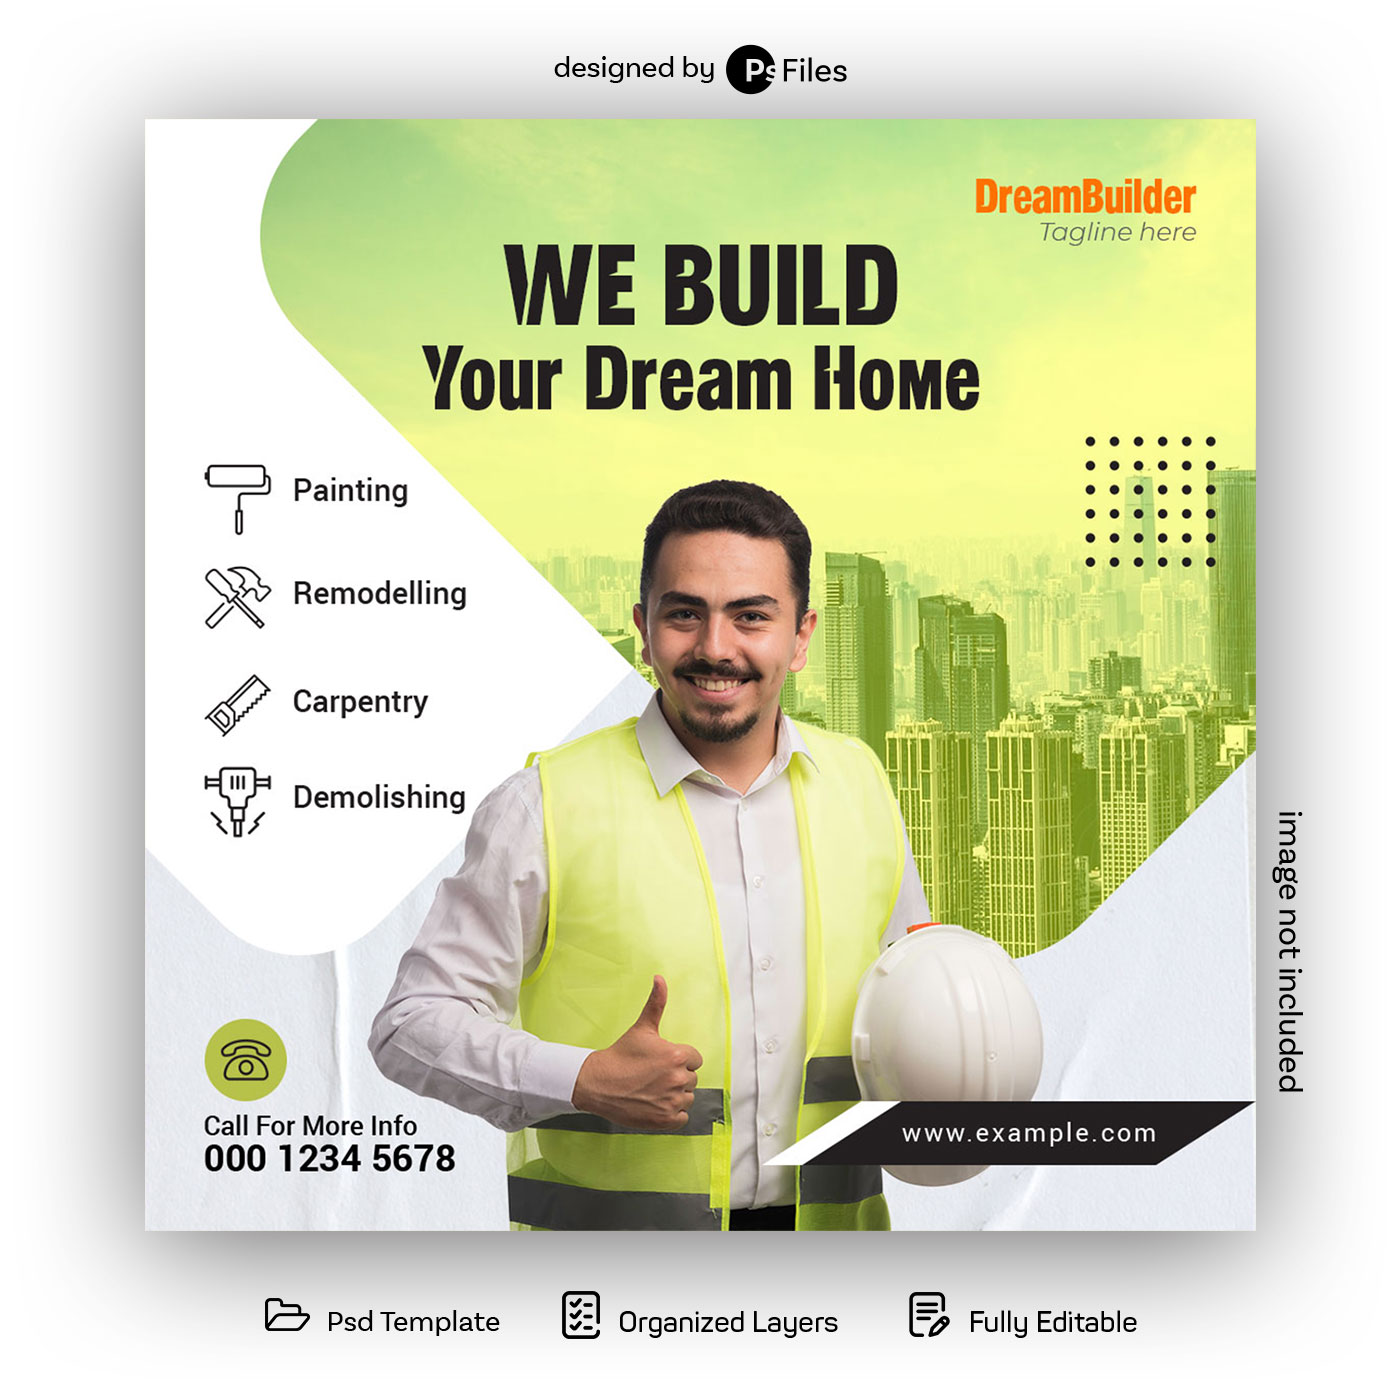 PsFiles Free Instagram Post Template for Builders and Construction Company